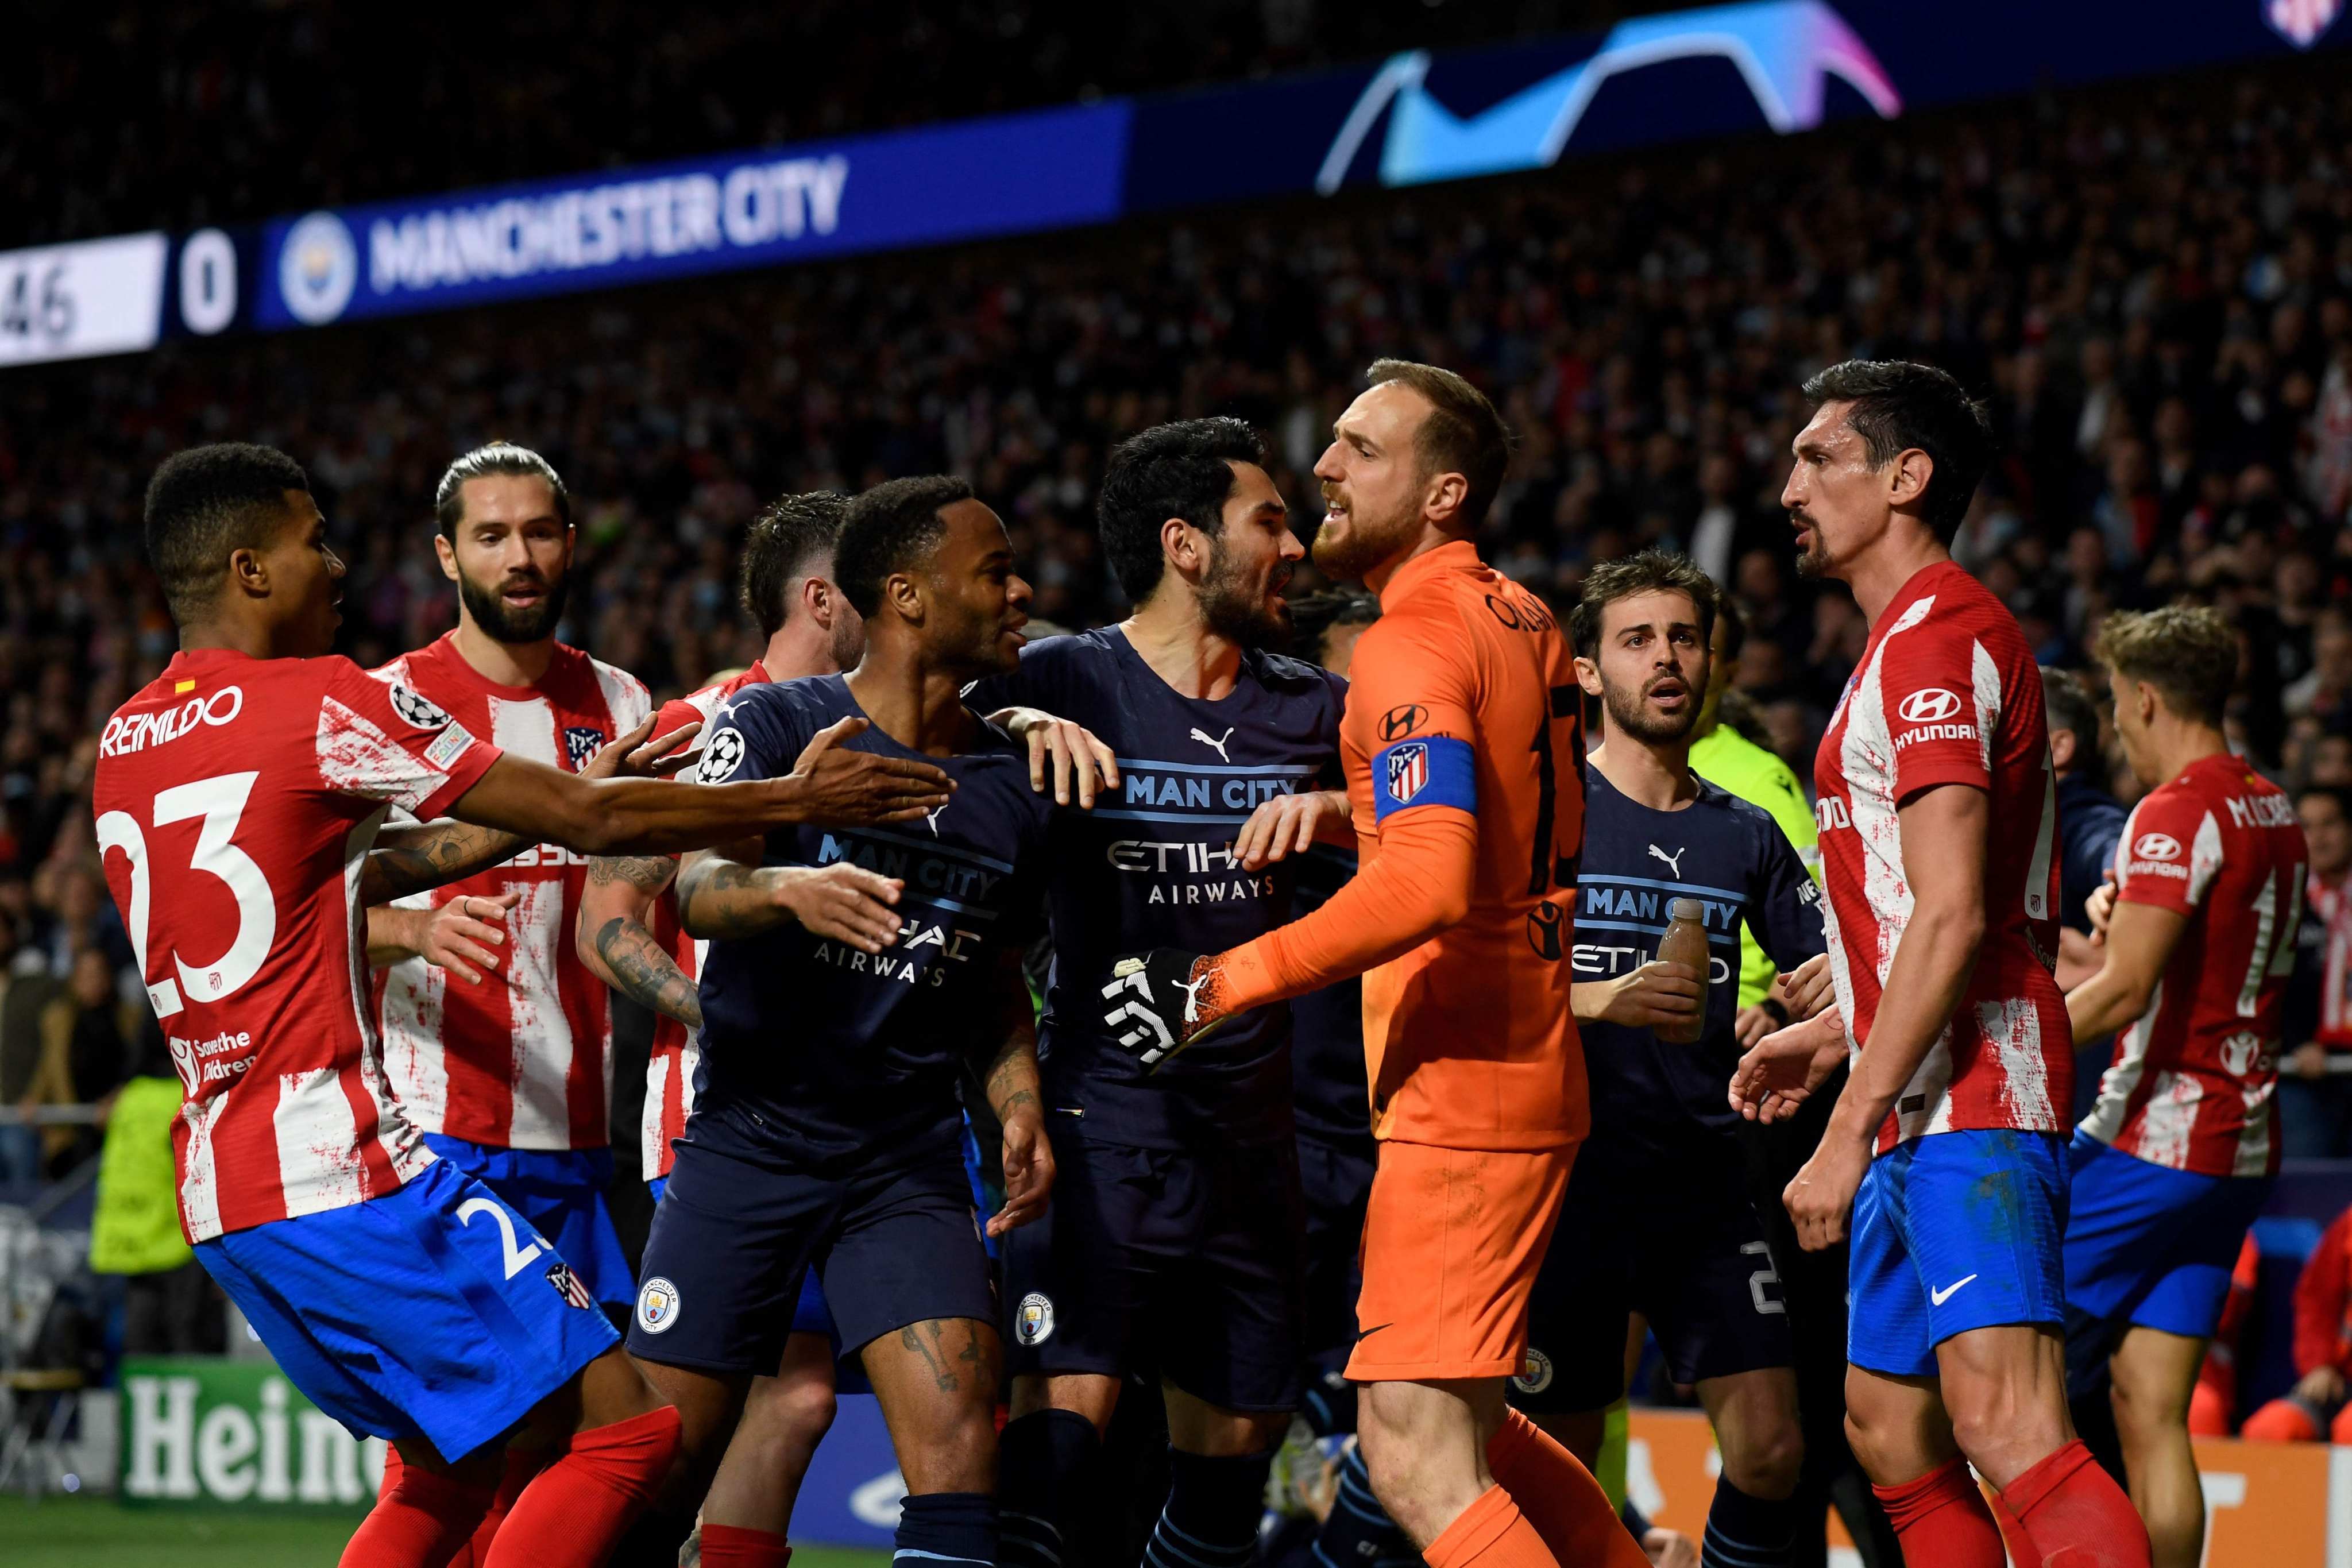 Players fight during the Uefa Champions League quarter final second leg match between Atletico Madrid and Manchester City. Photo: AFP